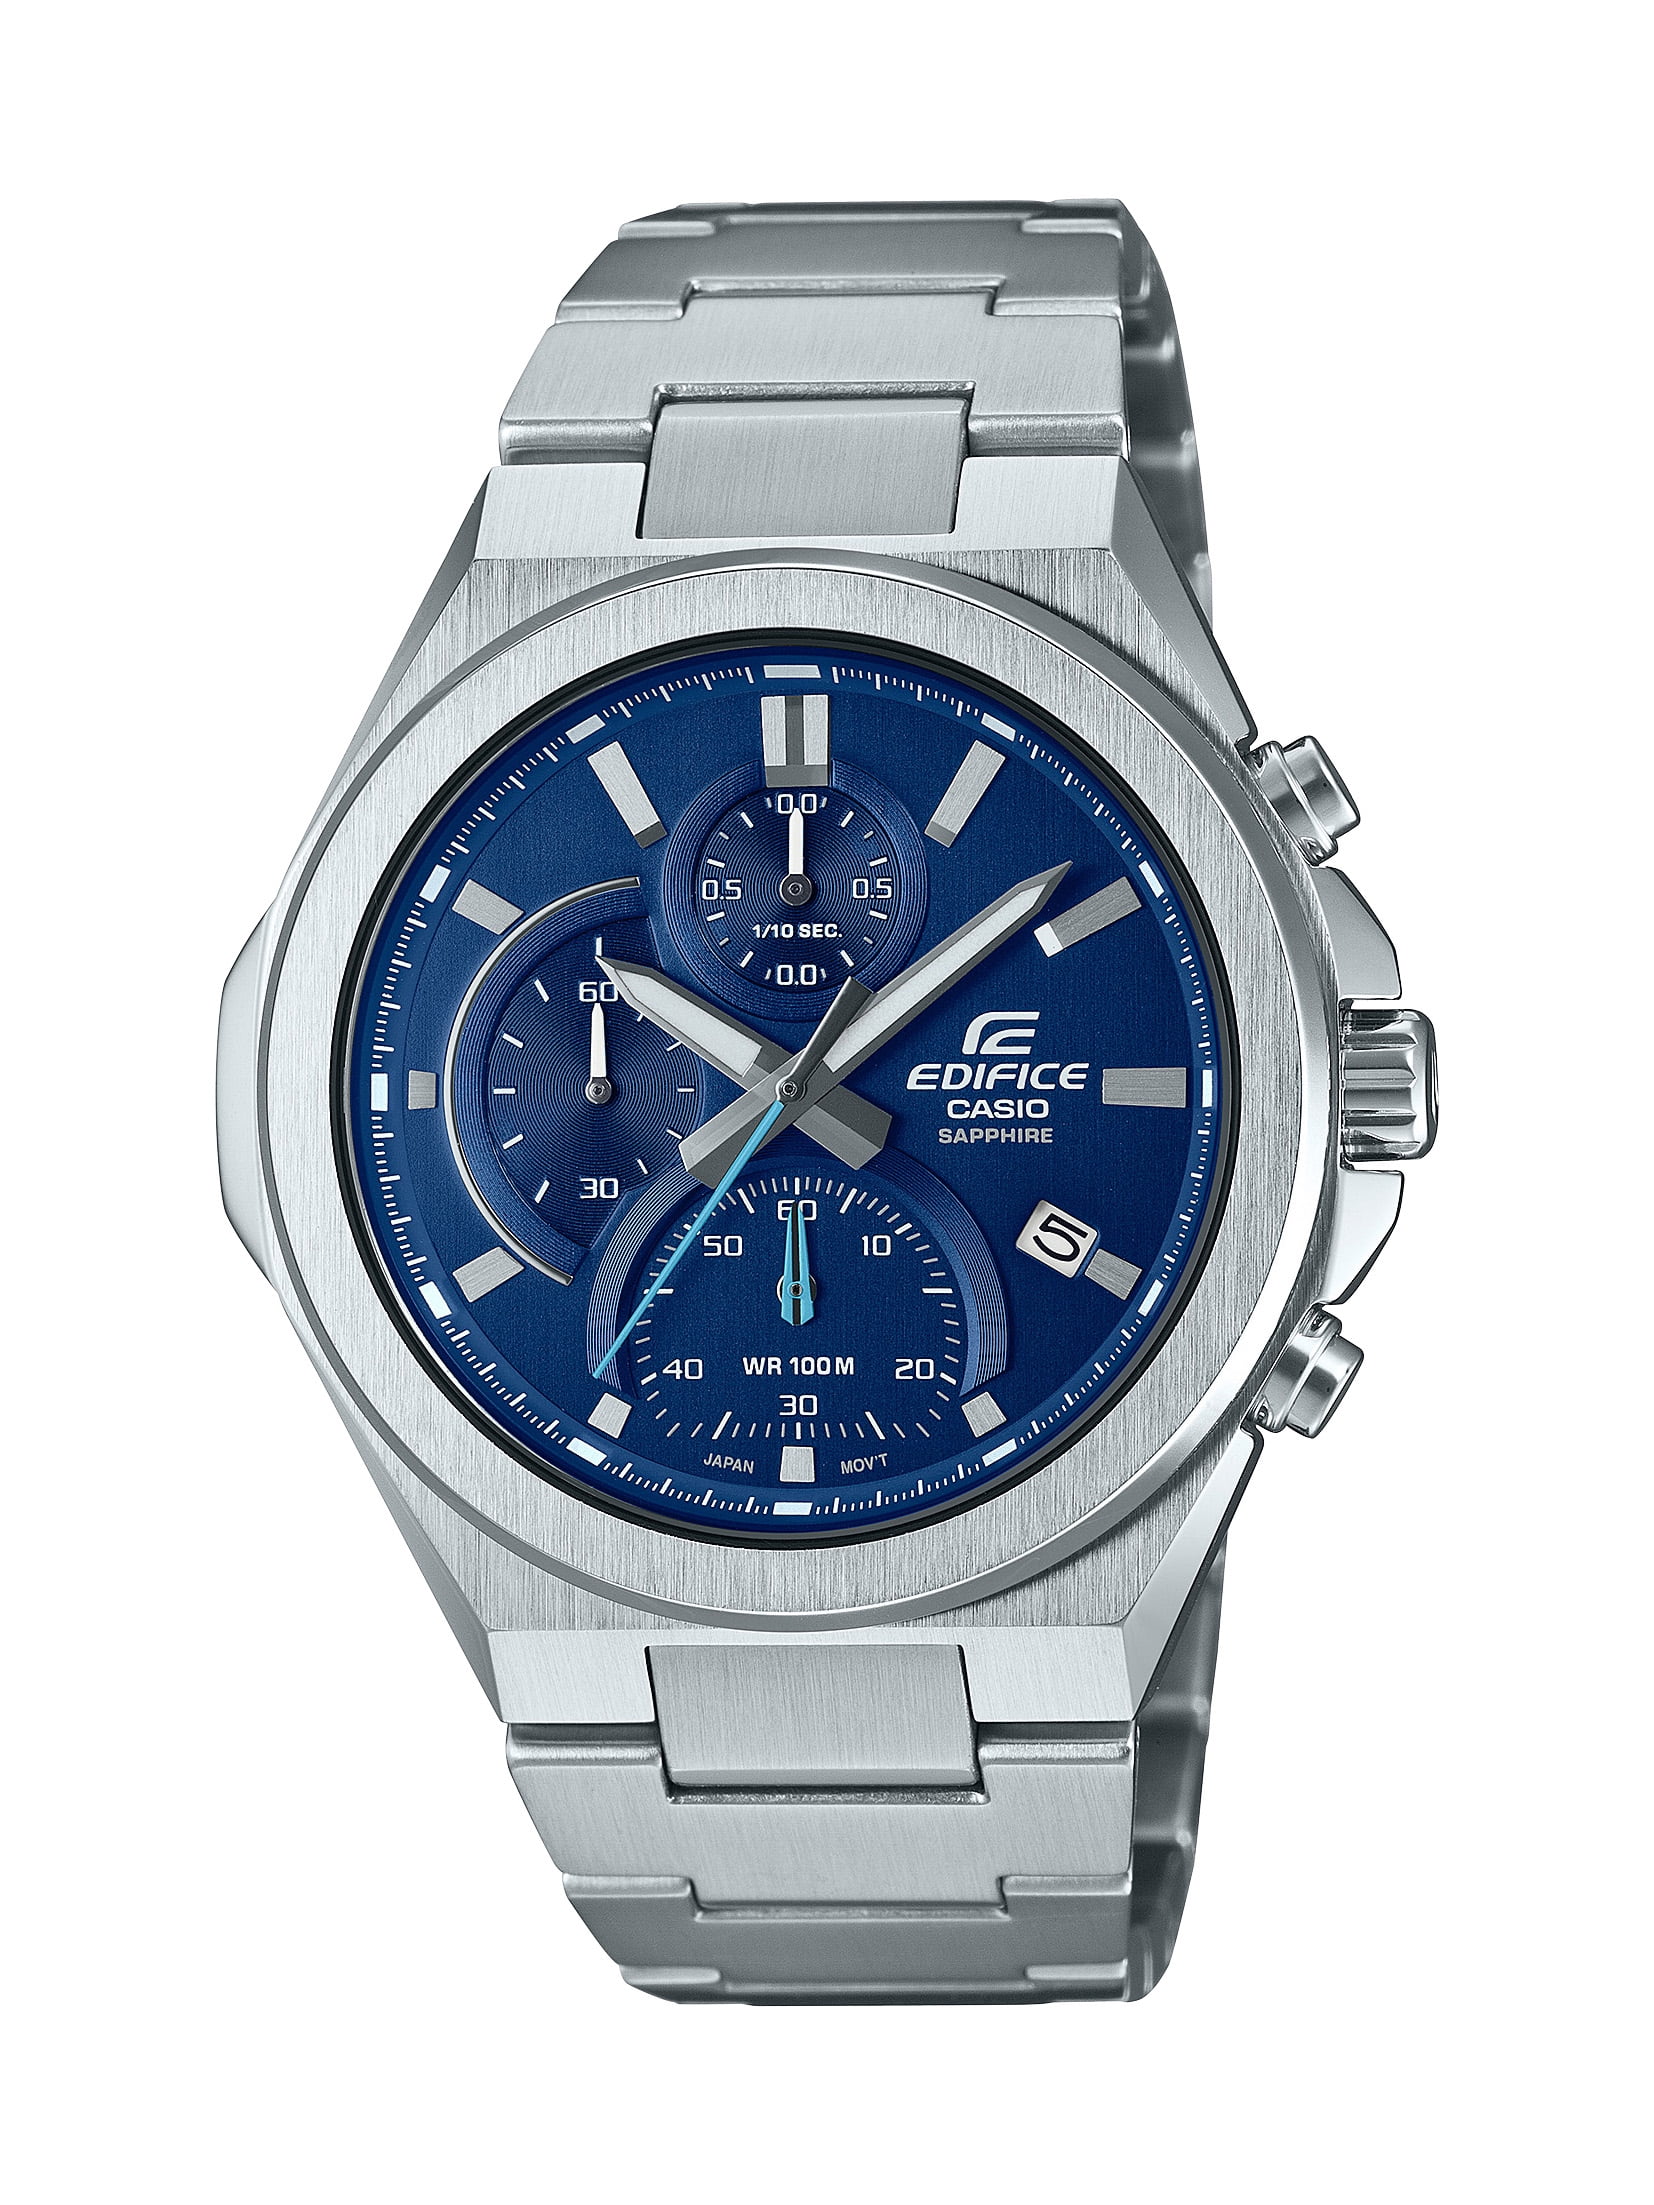 Casio Men's Edifice Chronograph Stainless Steel Watch with Blue Dial -  EFB700D-2AV 